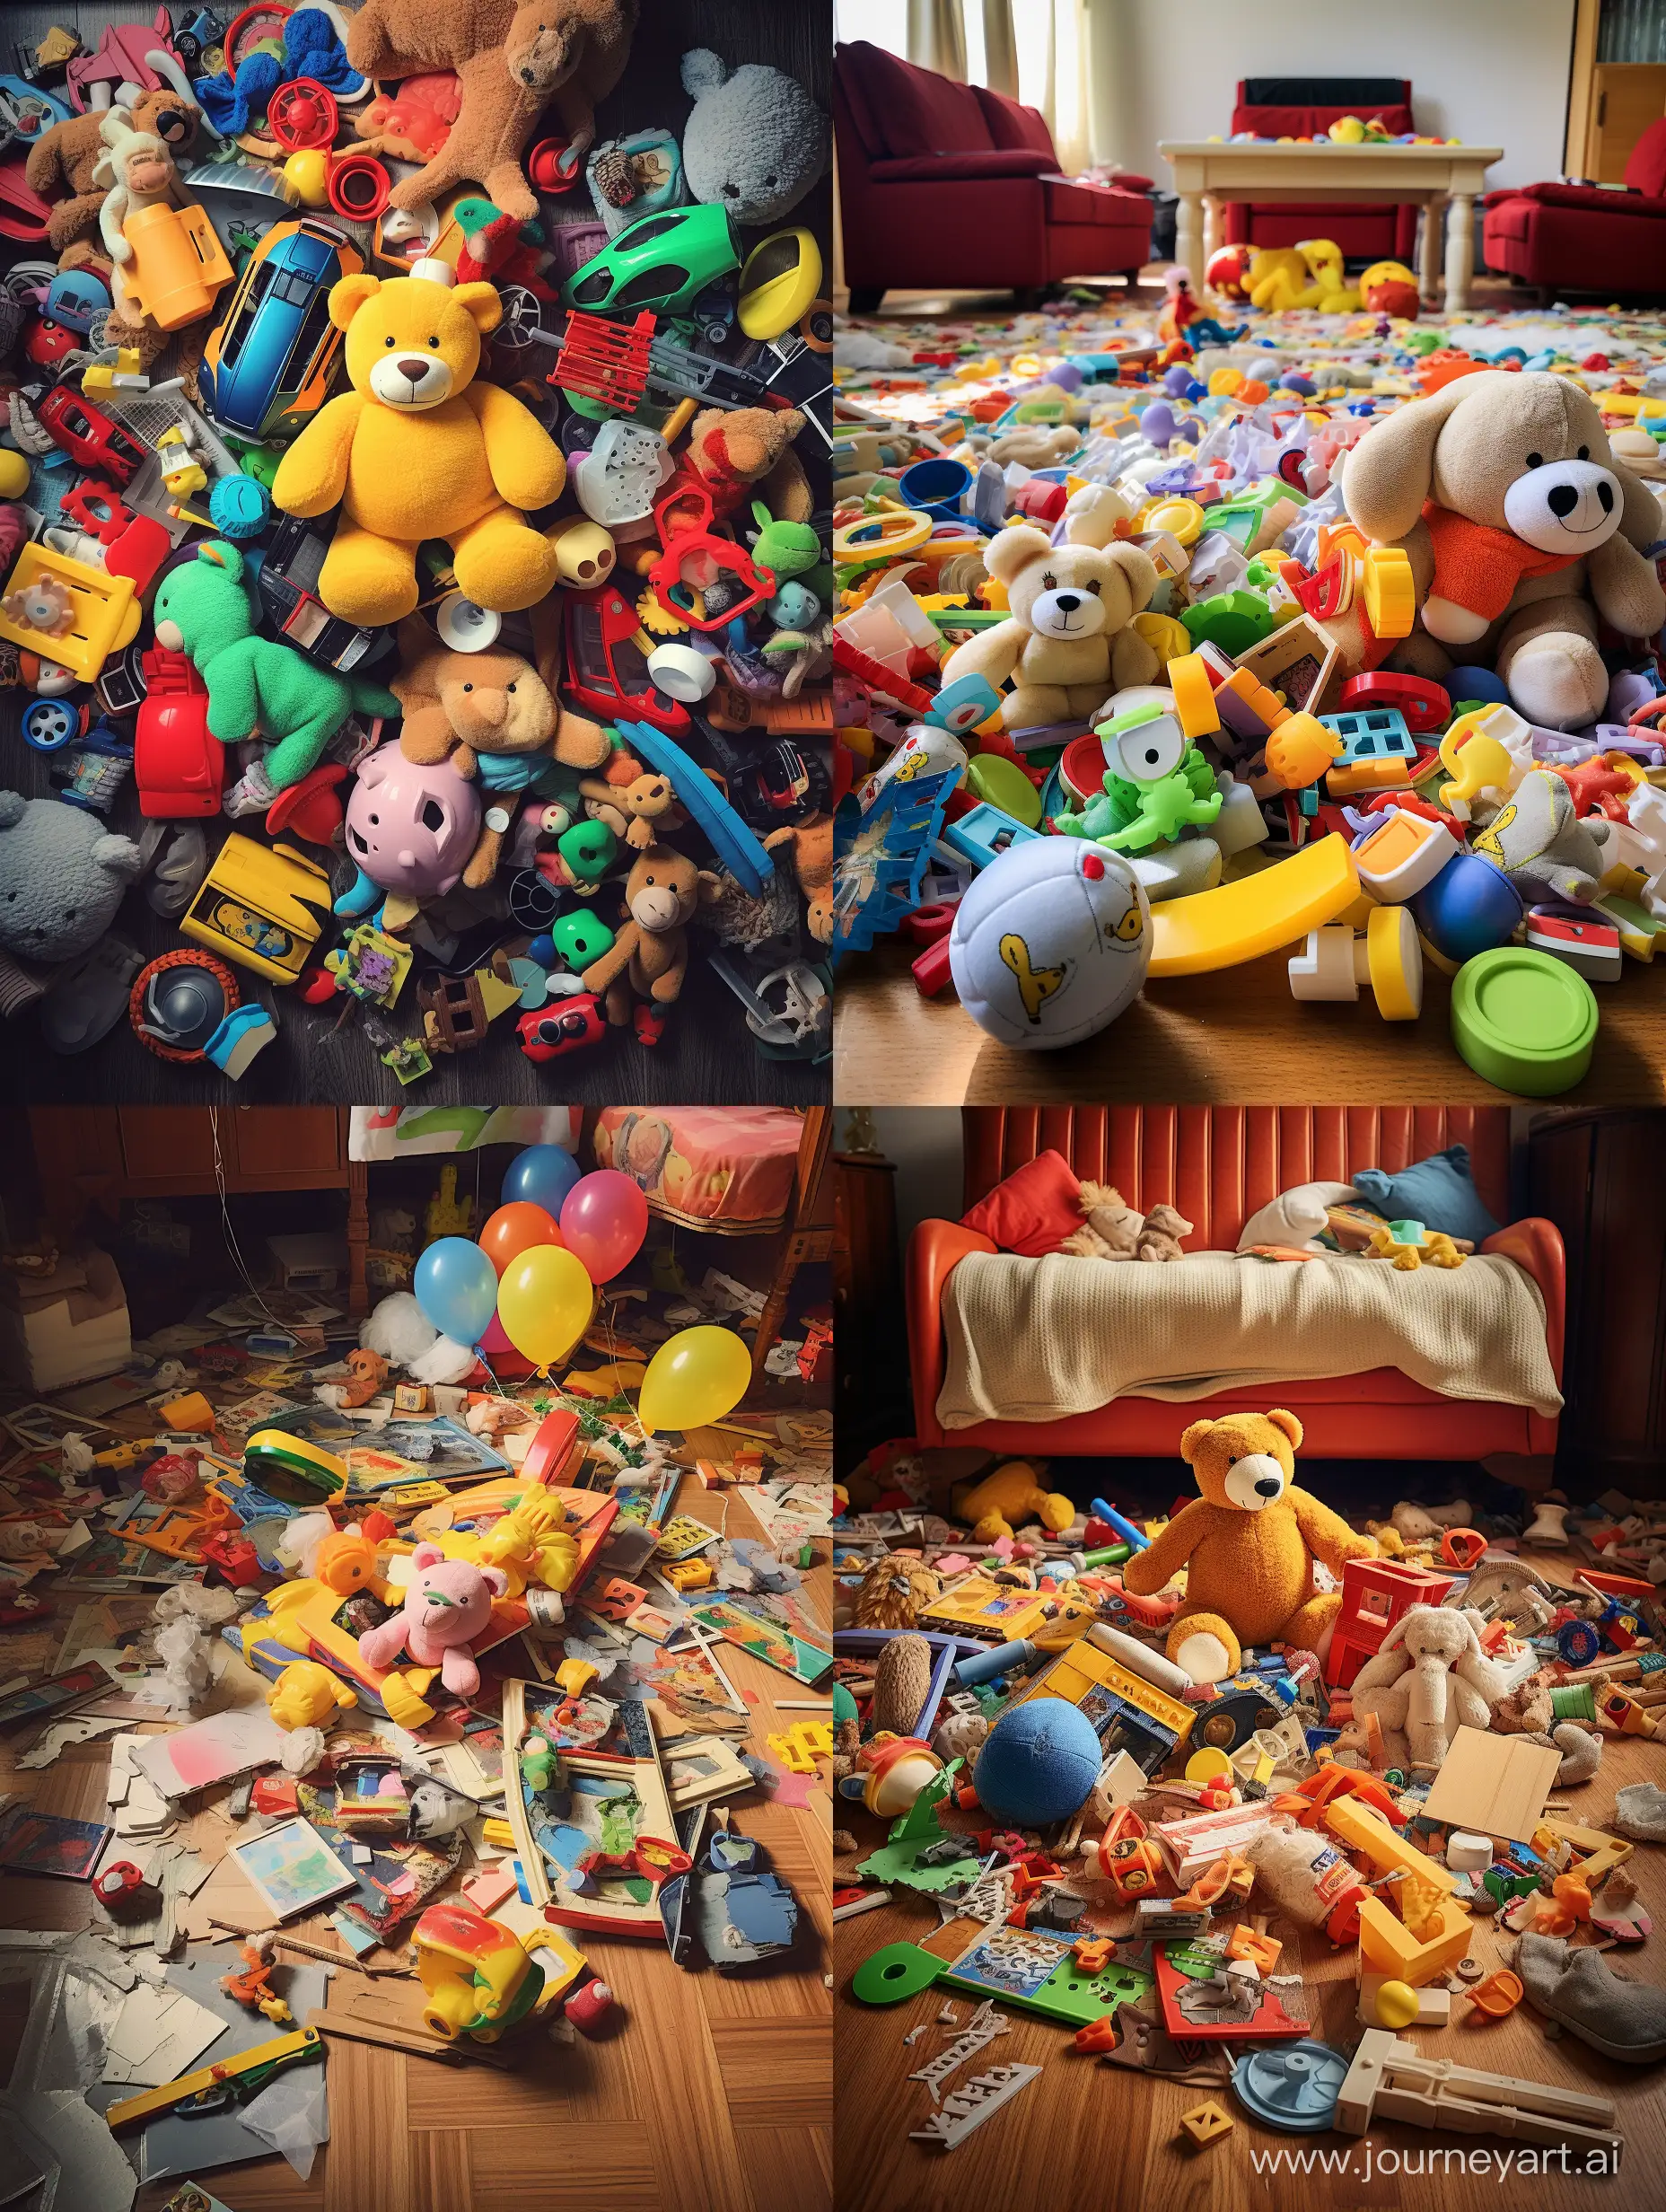 Children-Playing-with-Toys-Creating-a-Colorful-Mess-on-the-Floor